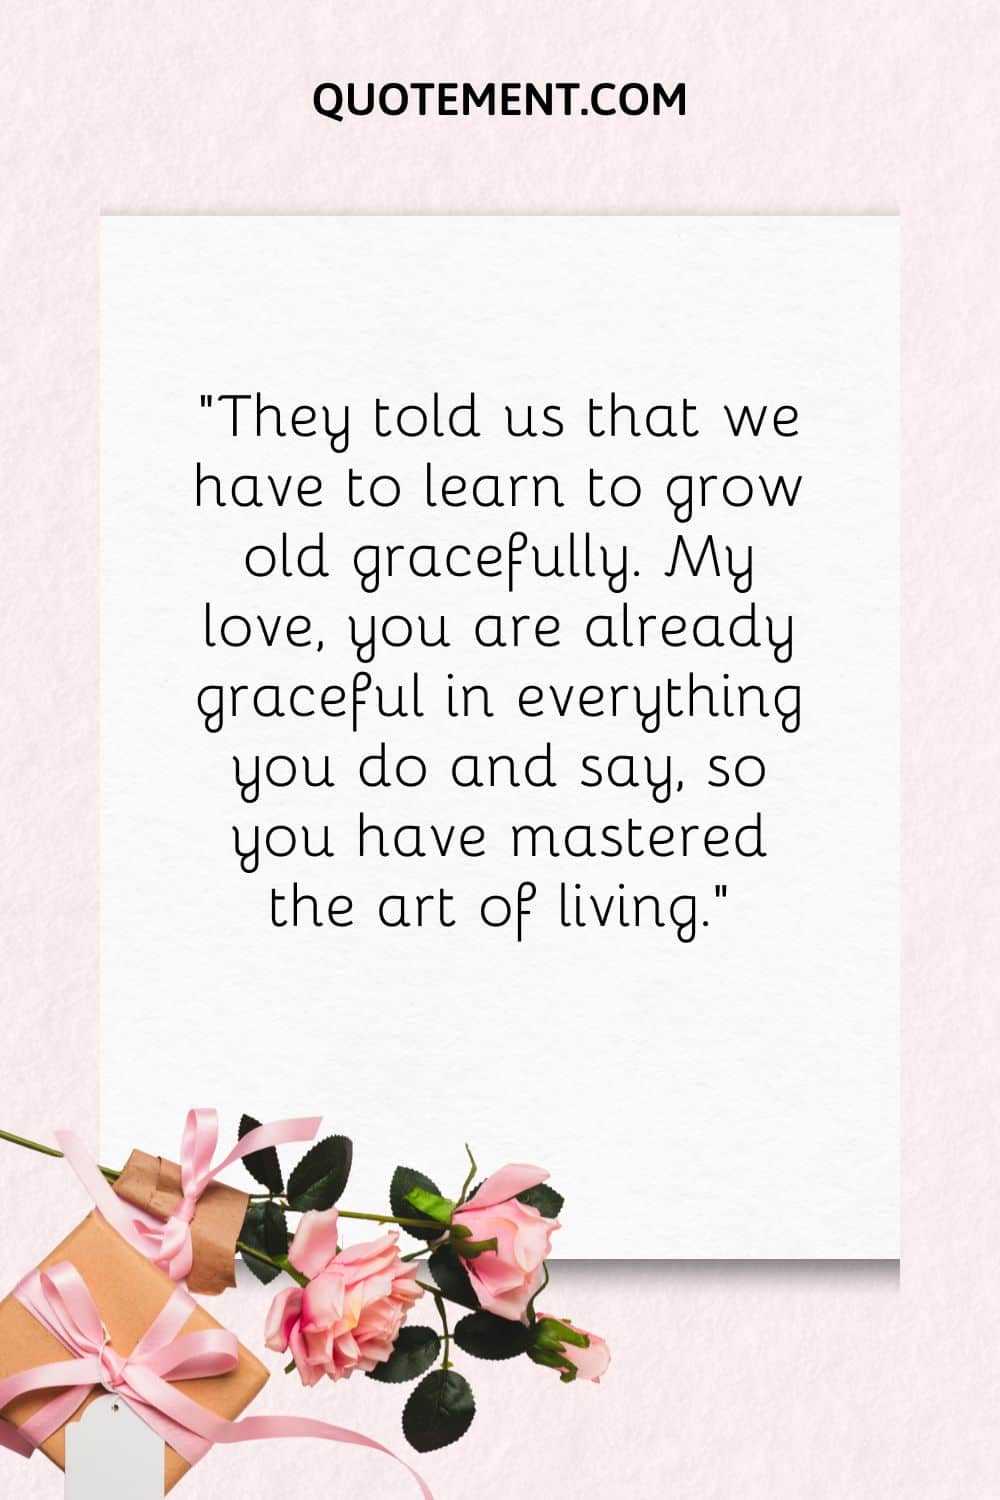 “They told us that we have to learn to grow old gracefully. My love, you are already graceful in everything you do and say, so you have mastered the art of living.”